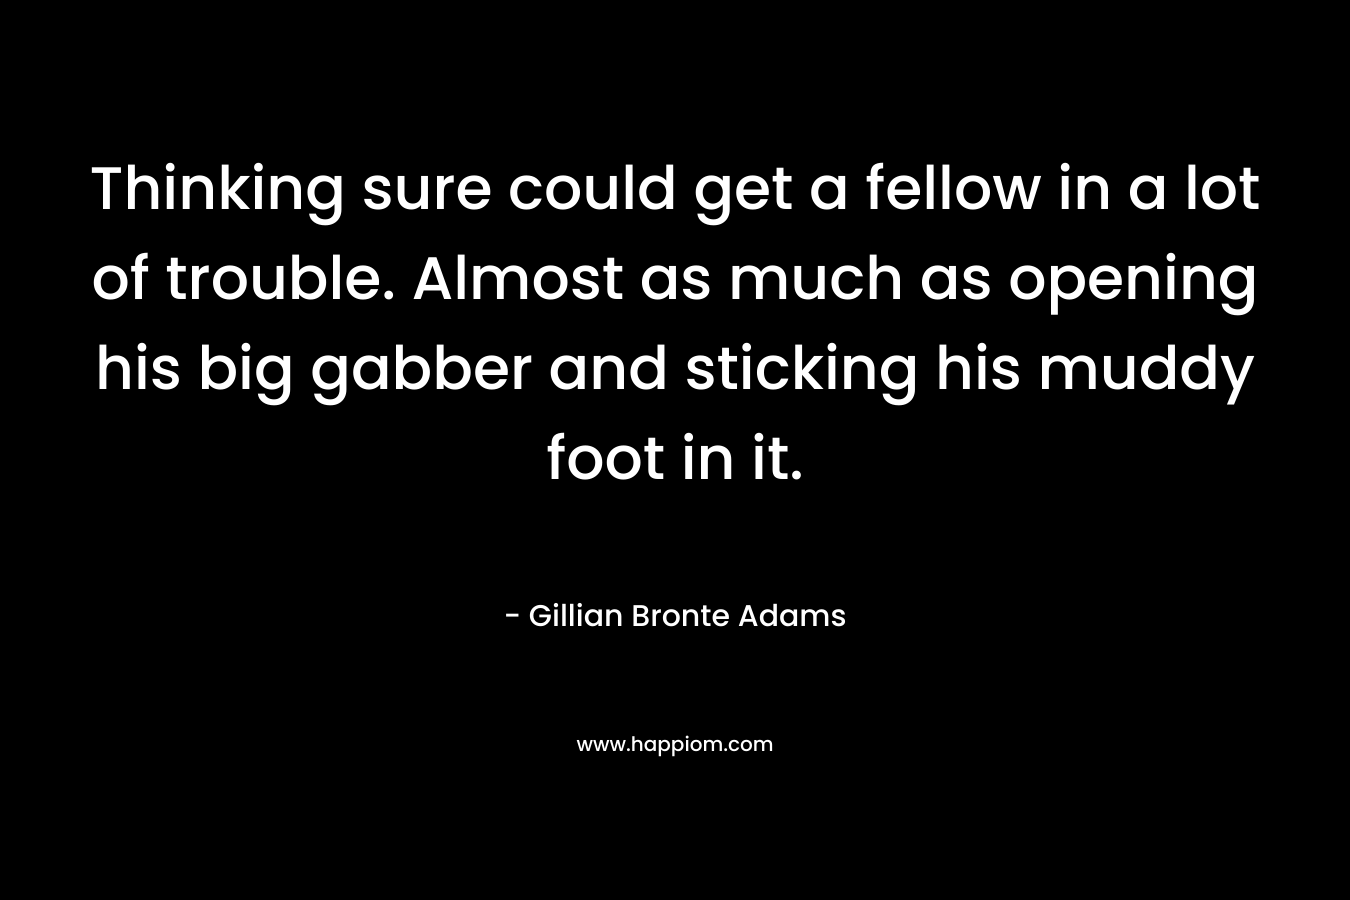 Thinking sure could get a fellow in a lot of trouble. Almost as much as opening his big gabber and sticking his muddy foot in it. – Gillian Bronte Adams